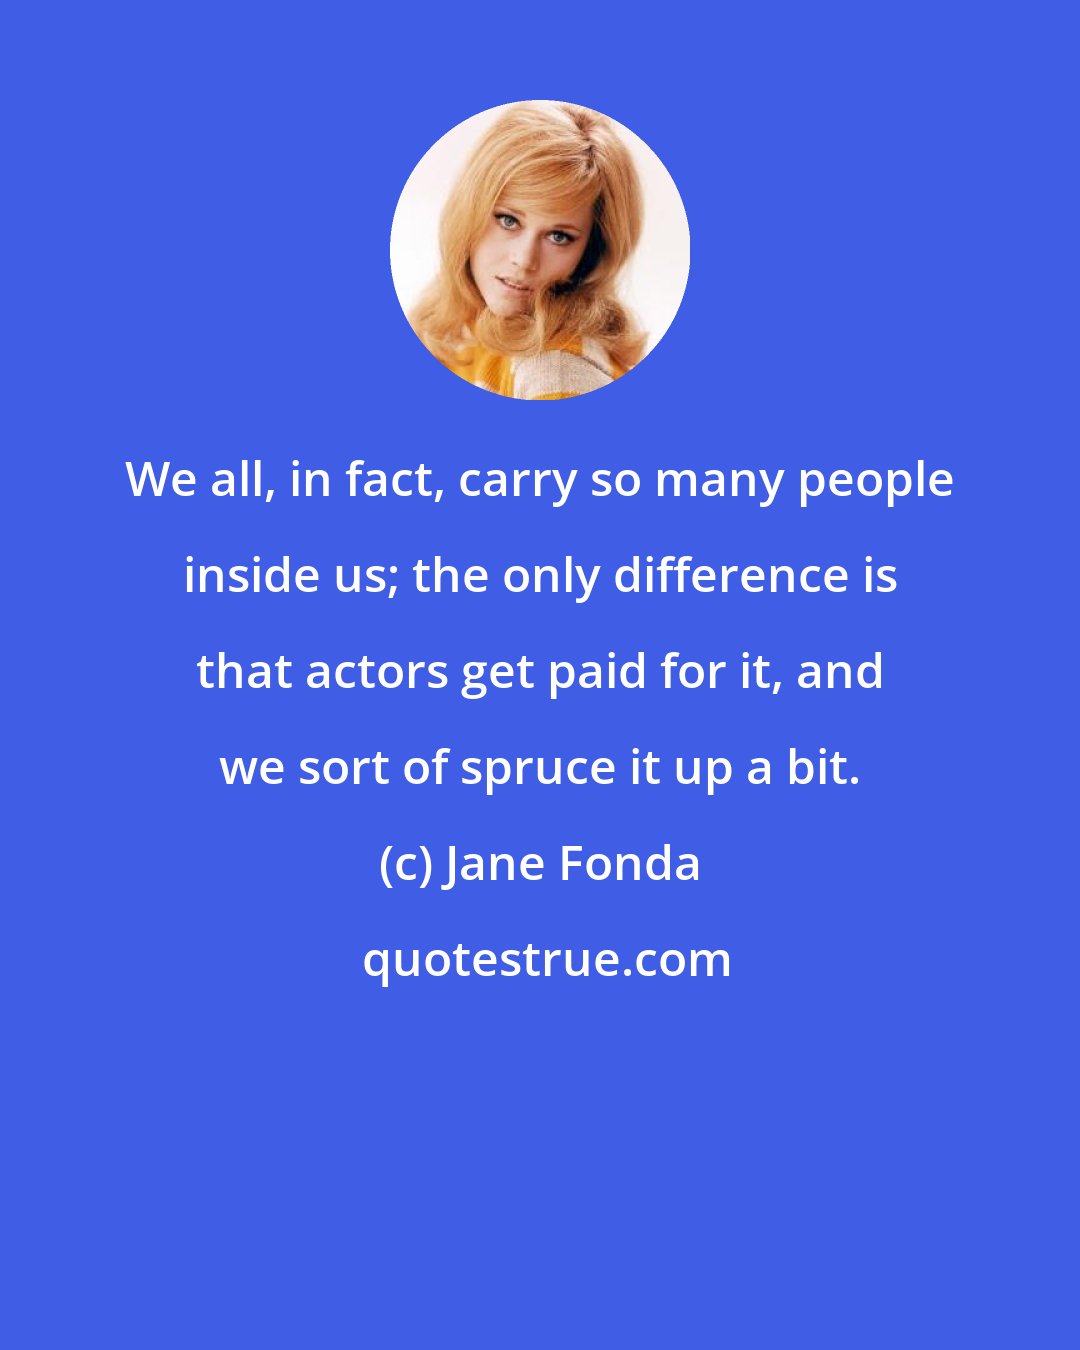 Jane Fonda: We all, in fact, carry so many people inside us; the only difference is that actors get paid for it, and we sort of spruce it up a bit.